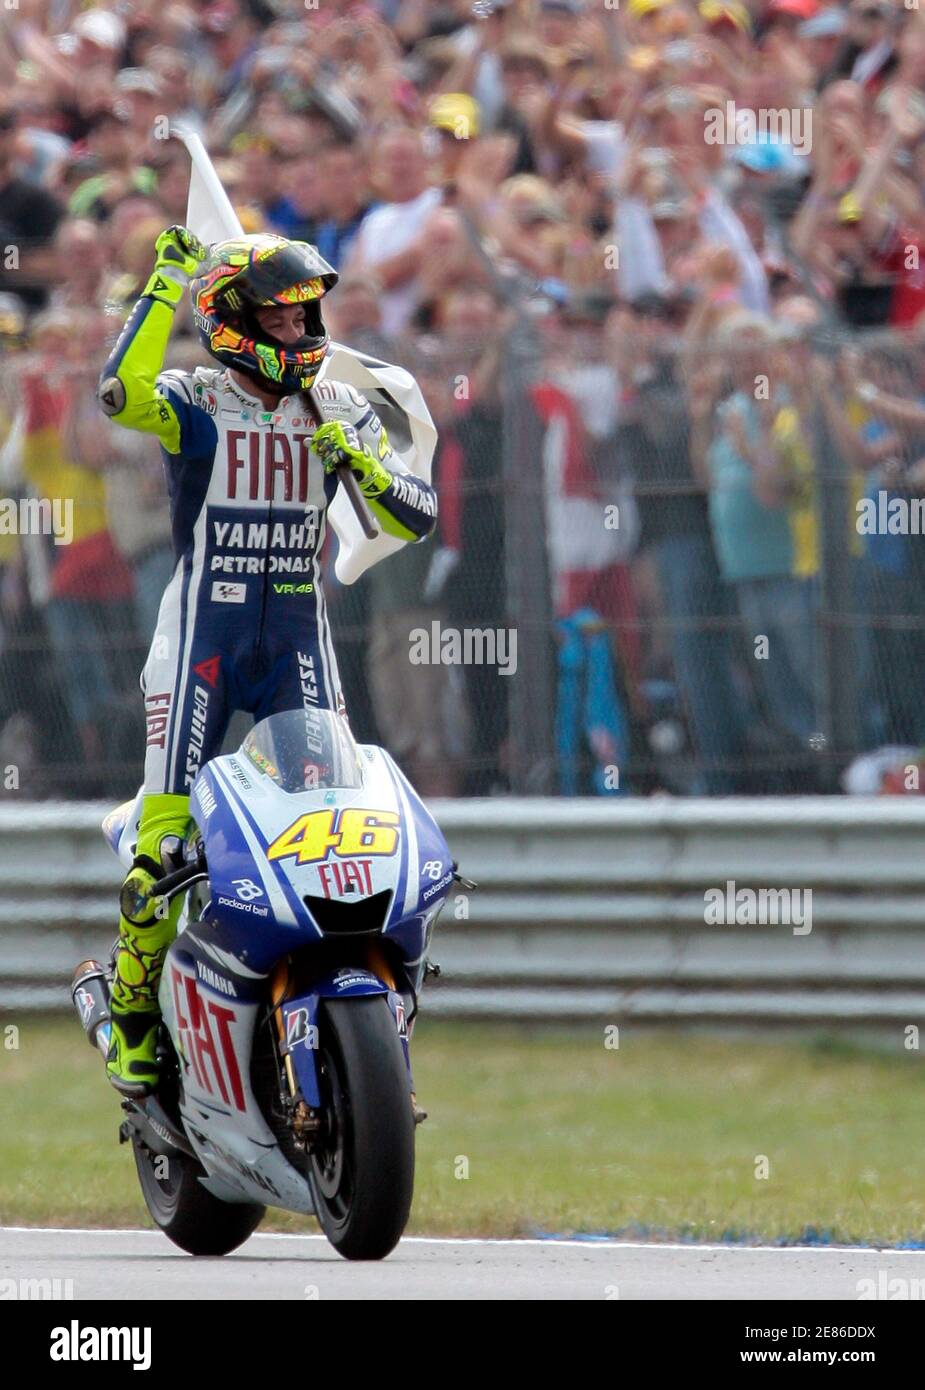 Yamaha MotoGP rider Valentino Rossi of Italy celebrates winning the Dutch  Motorcycling Grand Prix in Assen June 27, 2009. MotoGP world champion Rossi  won his 100th grand prix victory from pole position